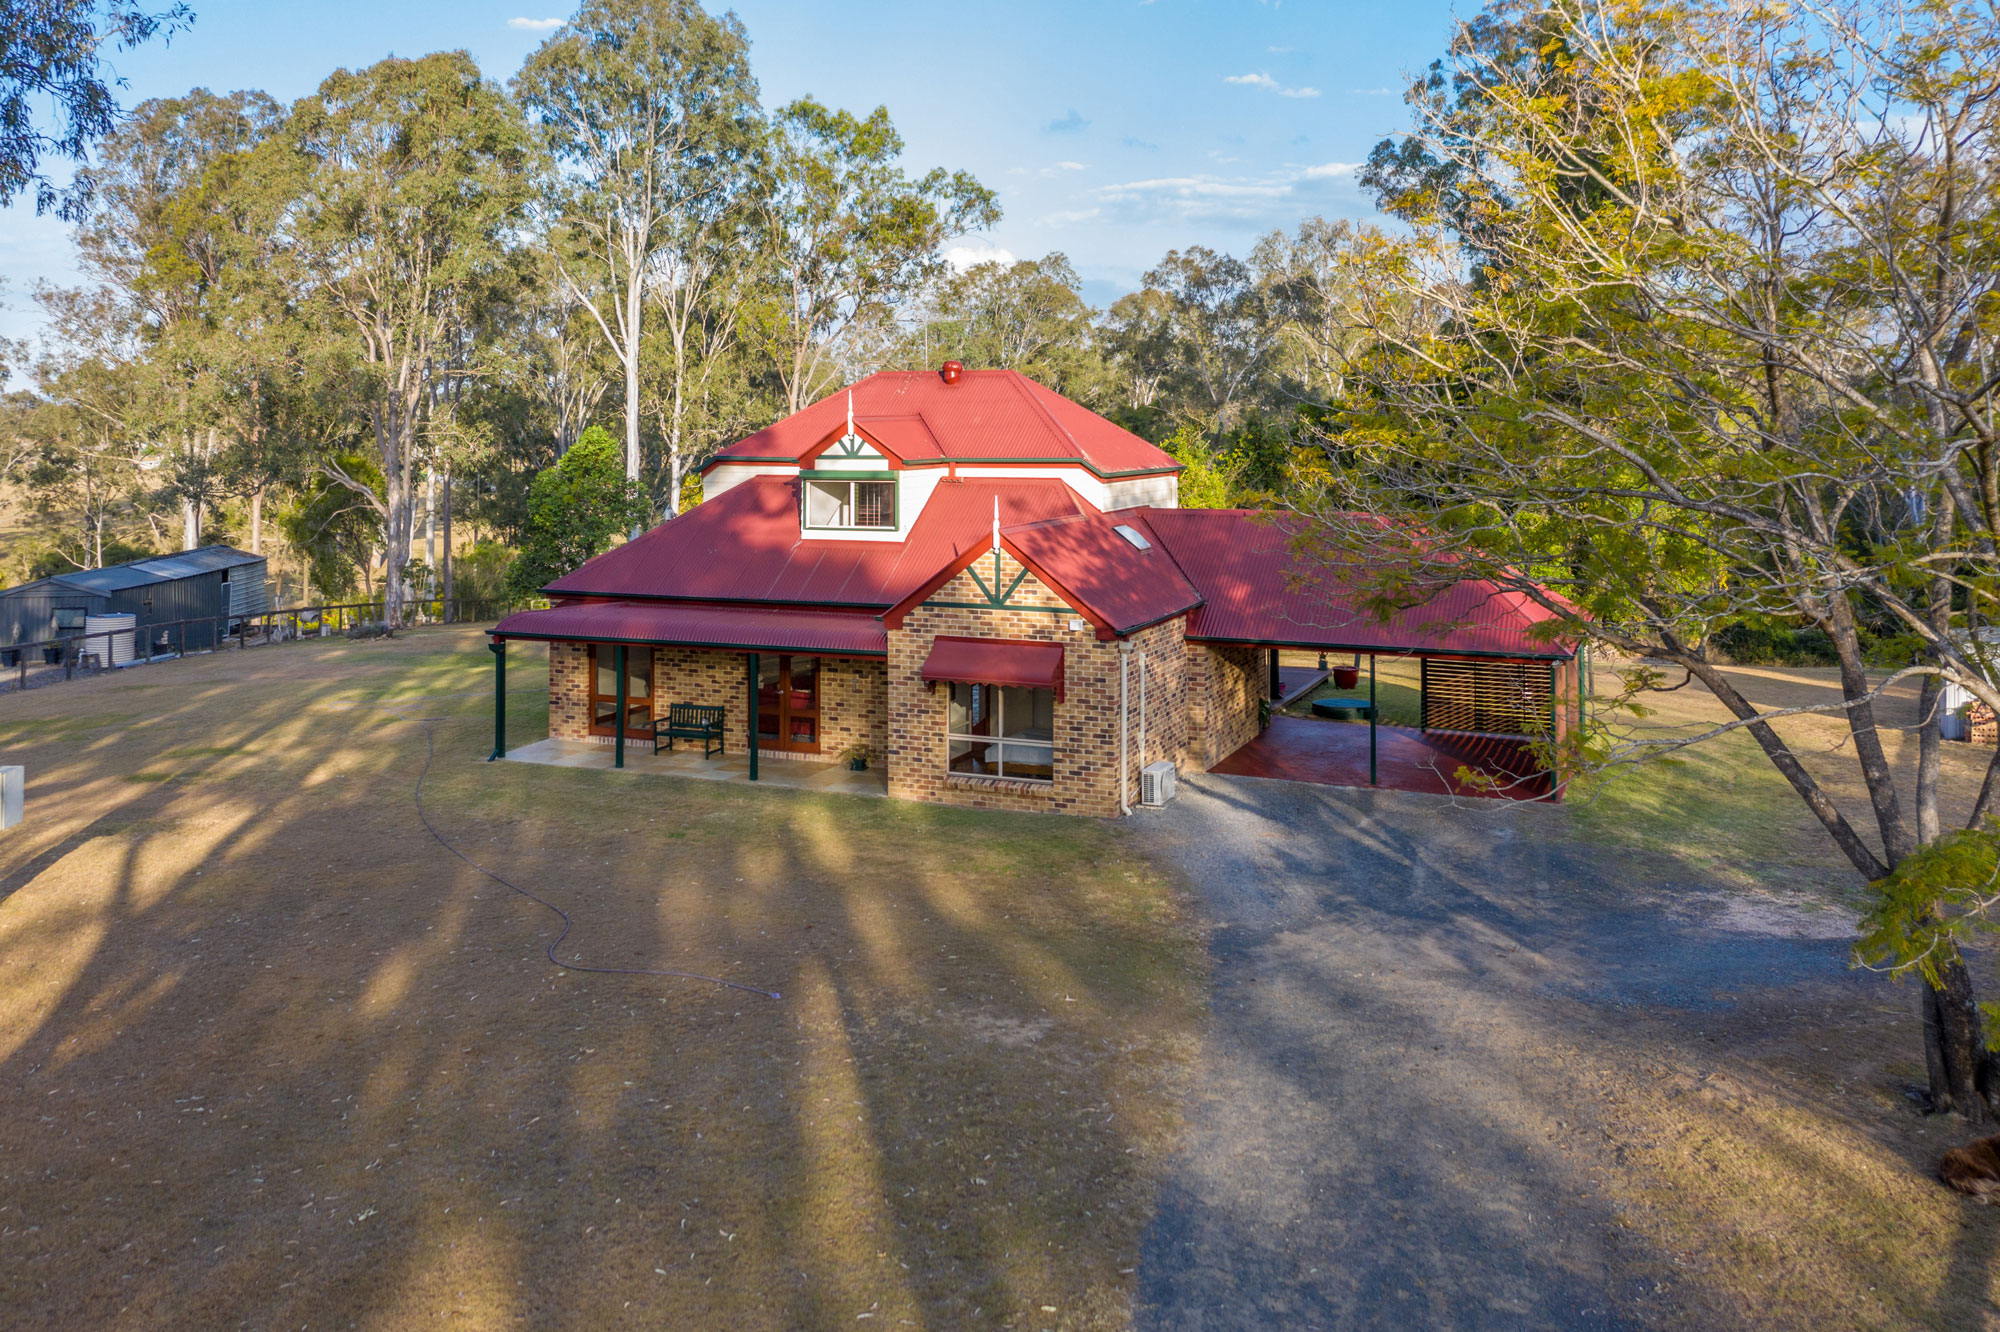 Elevated drone photography at 6 metres of acreage property for sale at Wishaw Rd Jimboomba